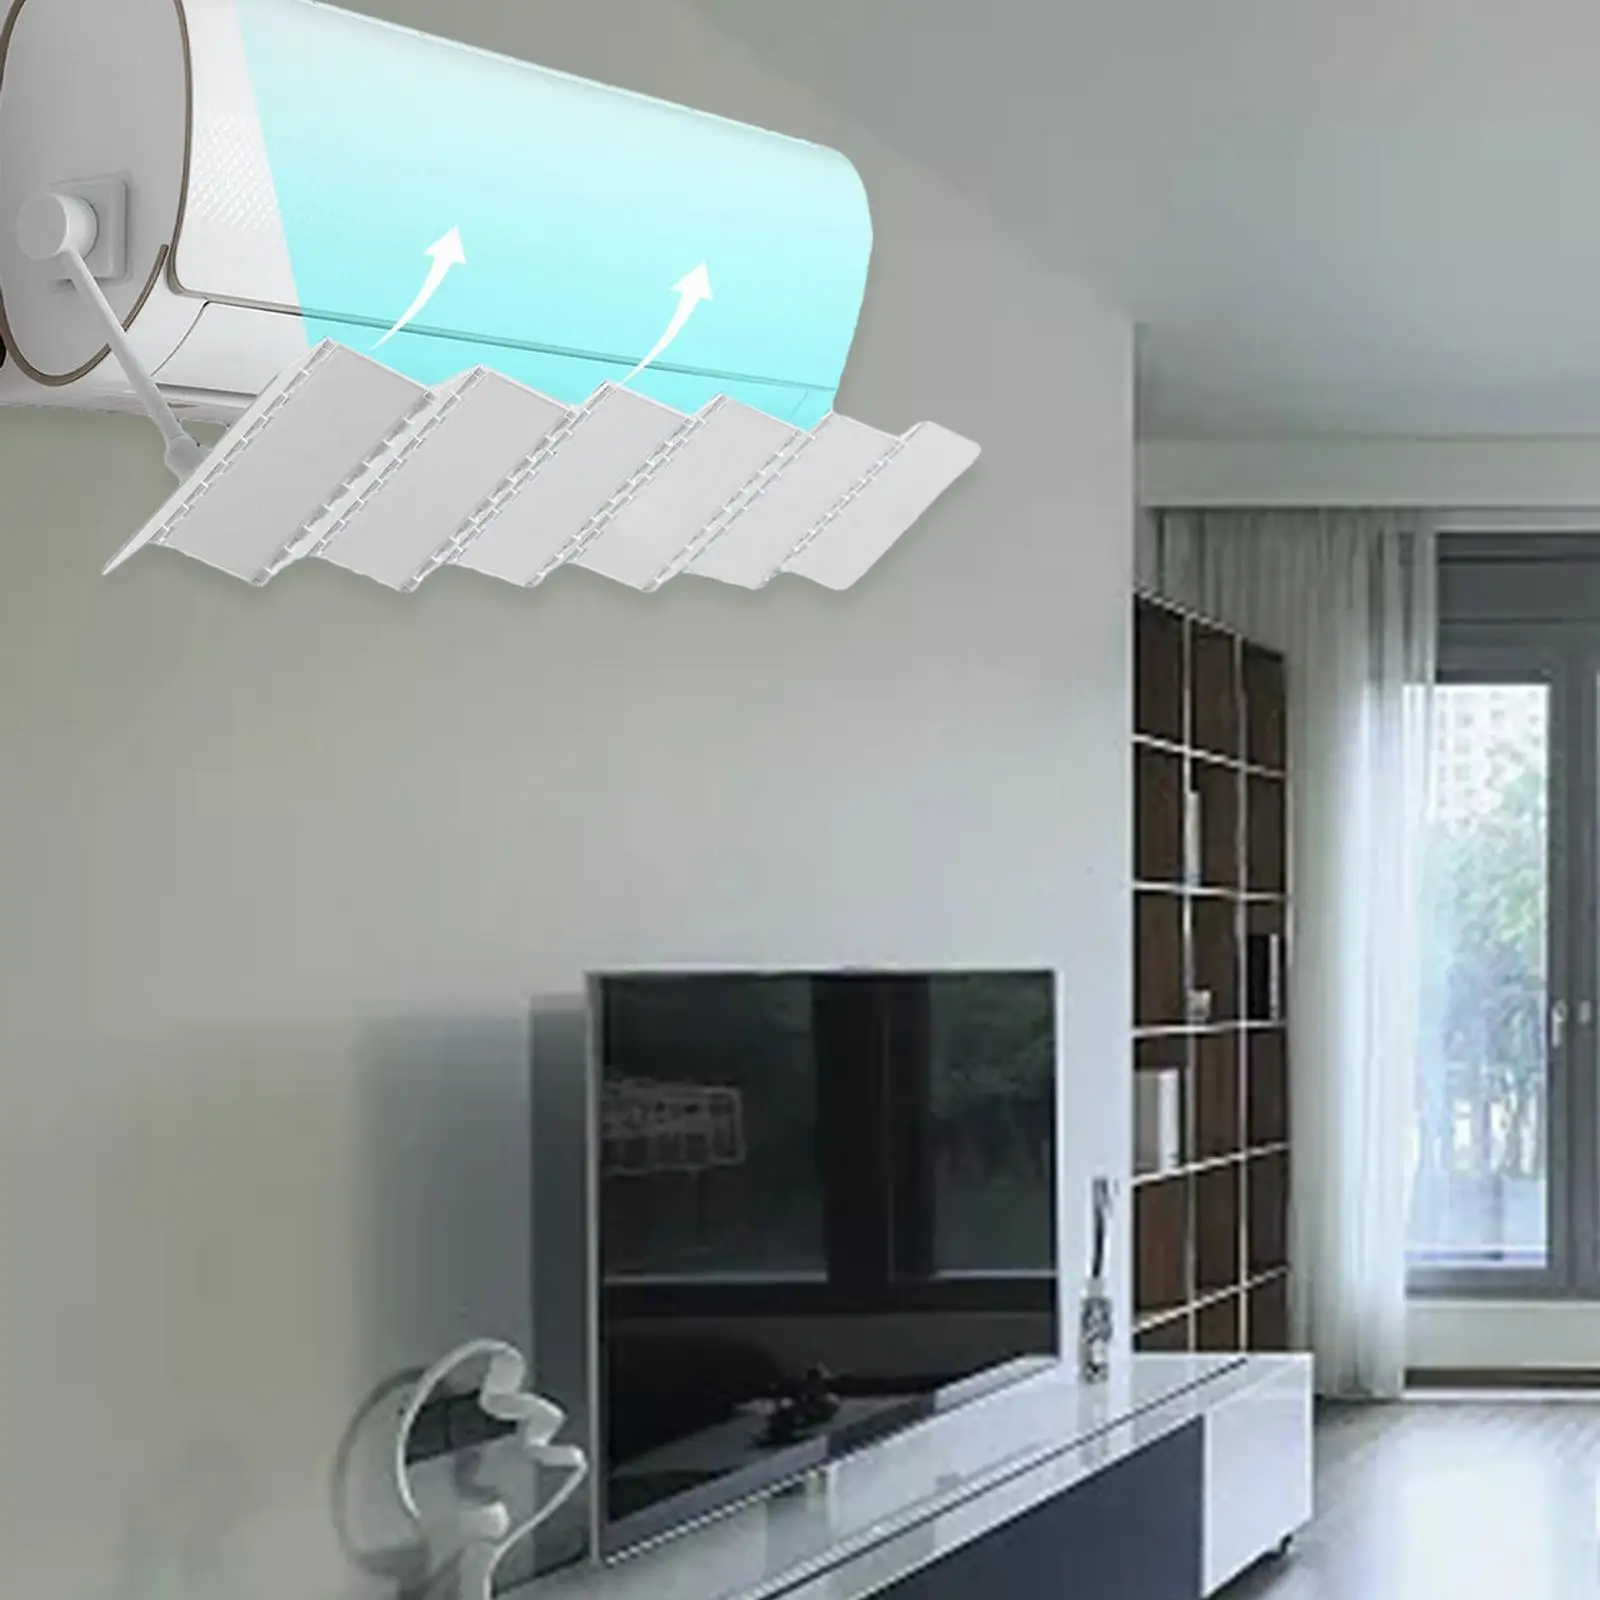 Air Conditioner Deflector Confinement Air Cooled Baffle for Living Room Home